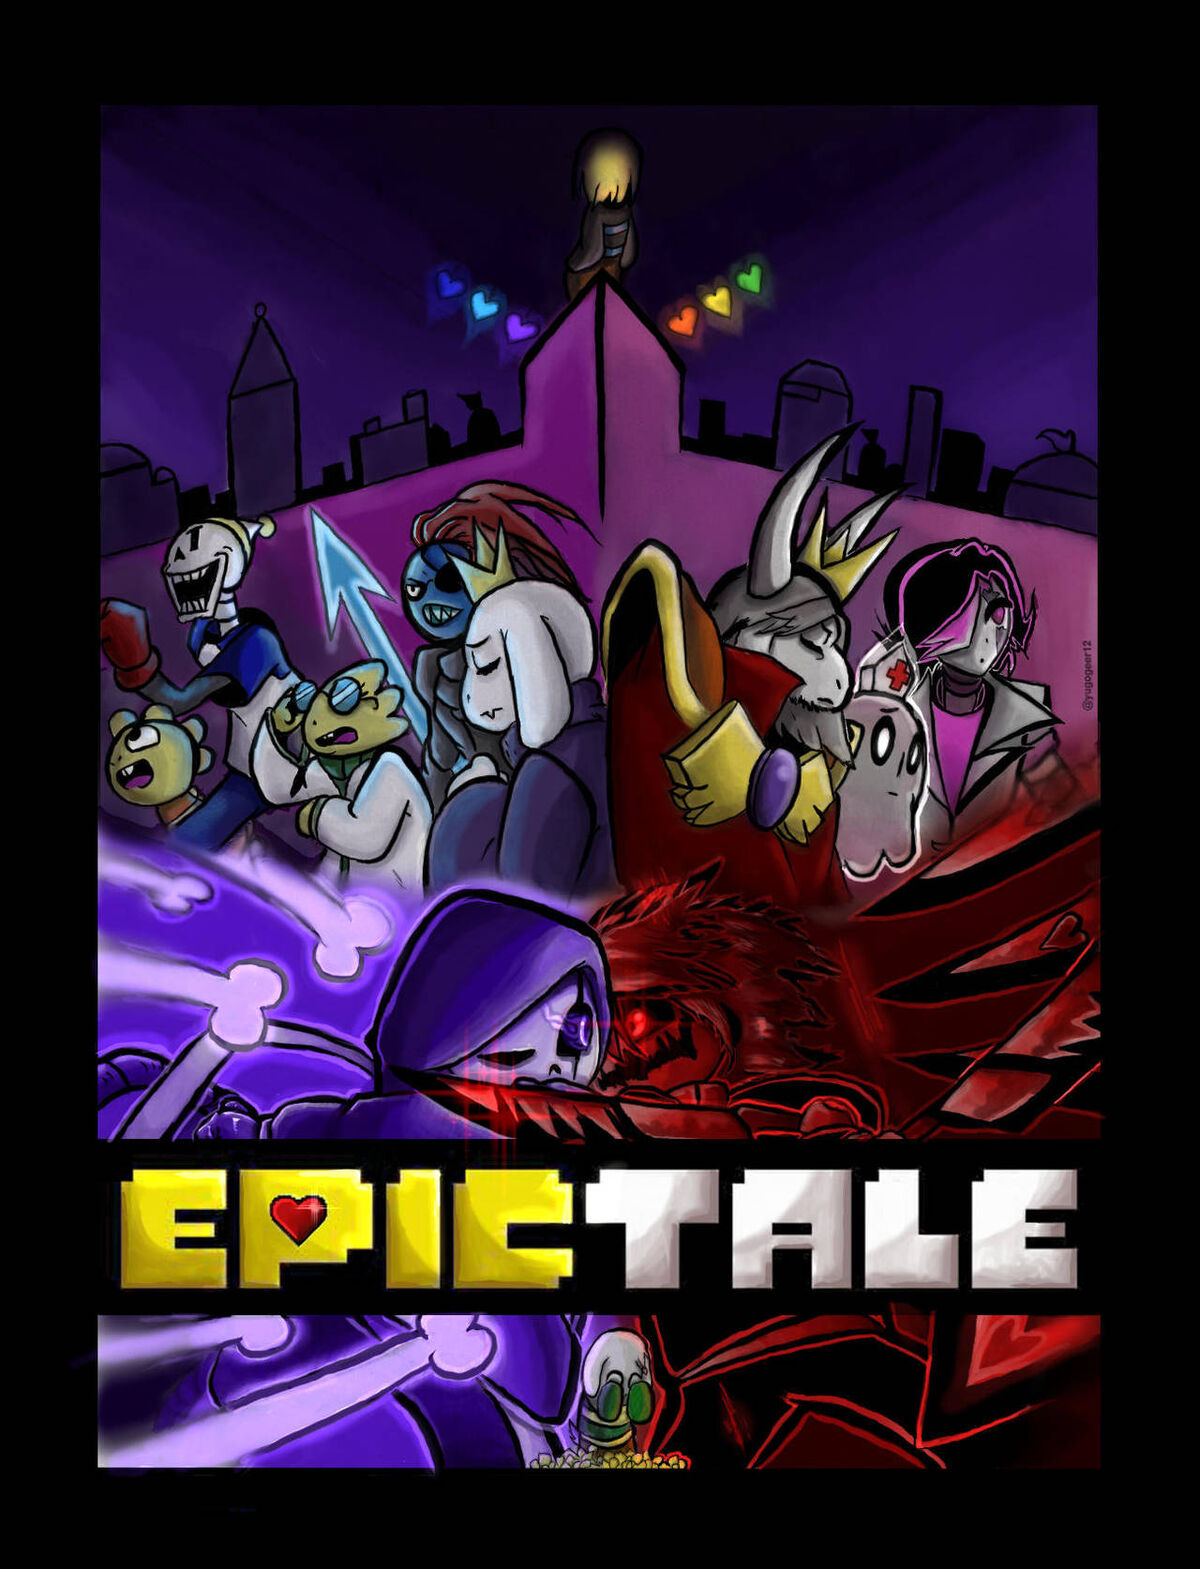 Undertale: An Epic Tale of Adventure and Emotion